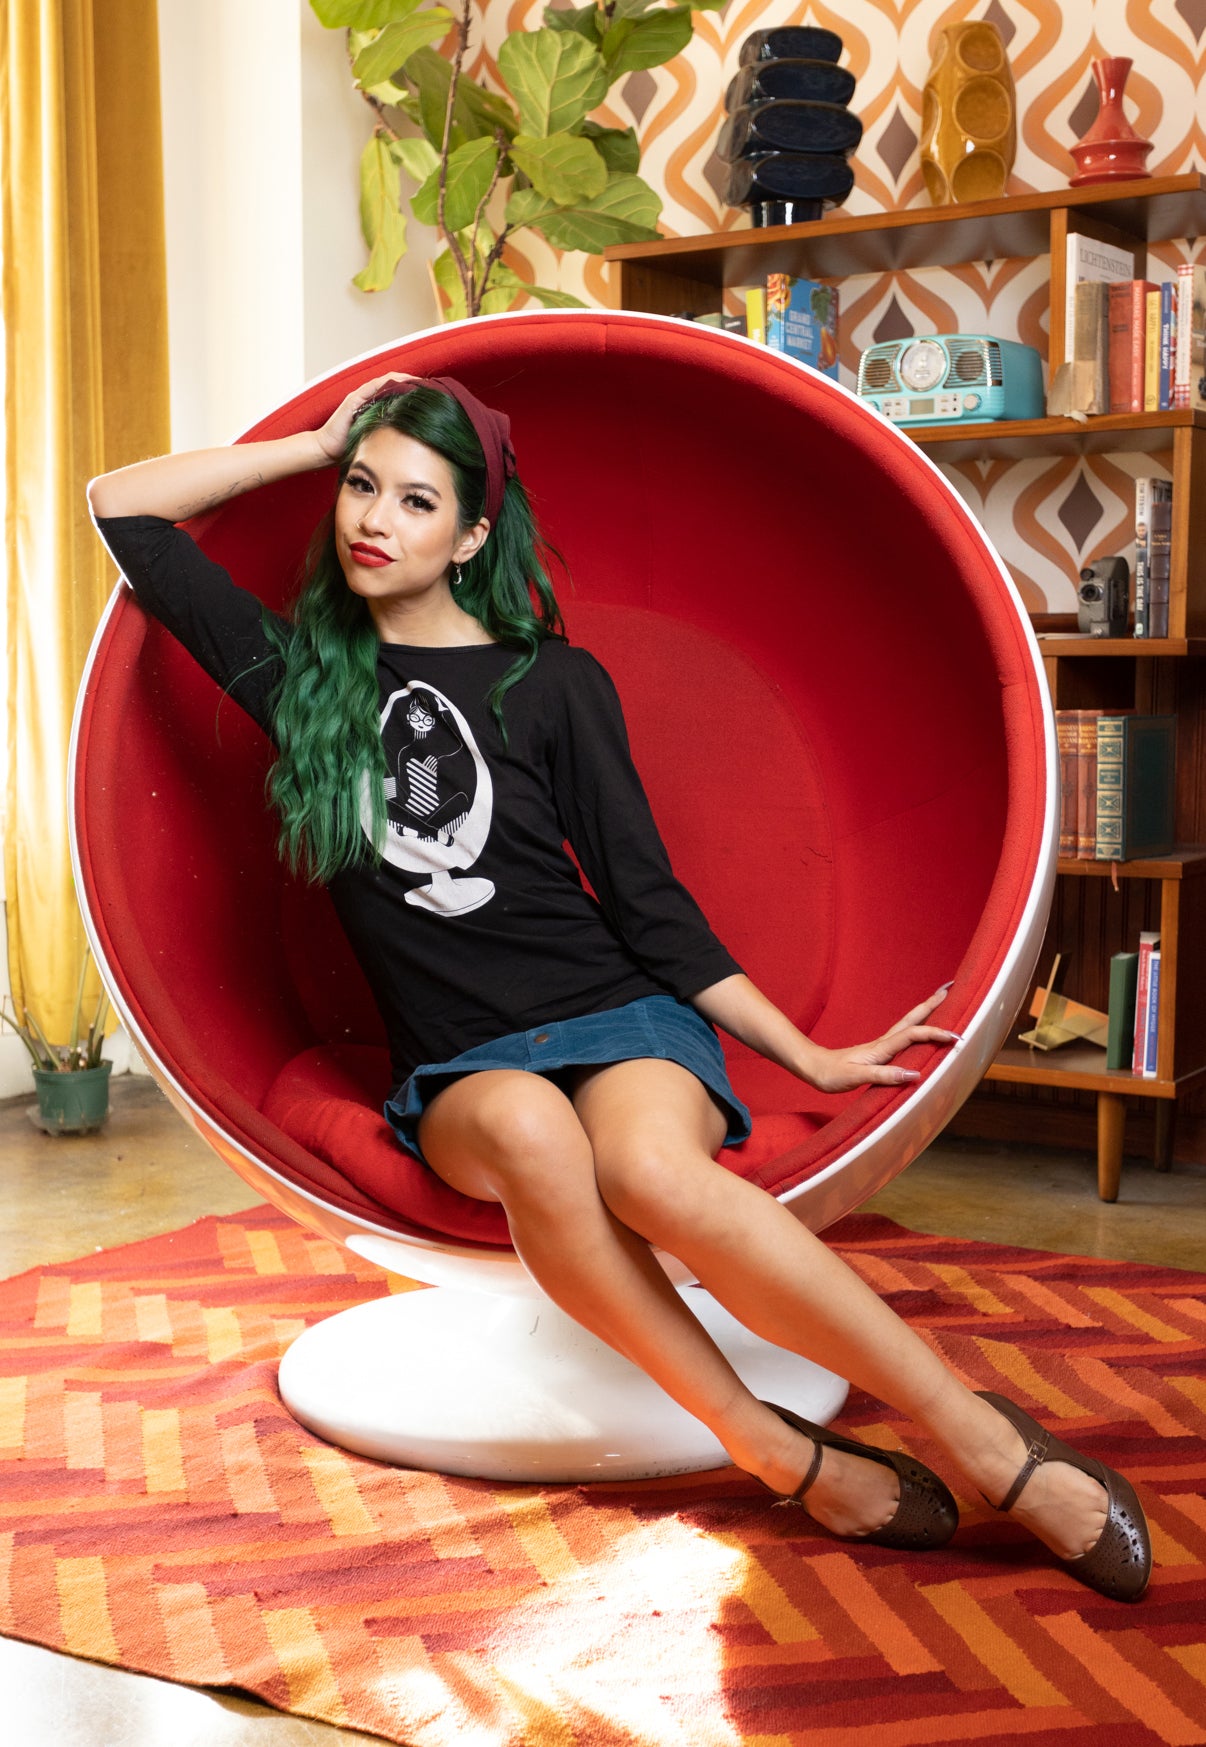 Girl with long green hair sitting in a ball chair and wearing black 3/4 sleeve tee with a white graphic of a girl reading in an egg chair